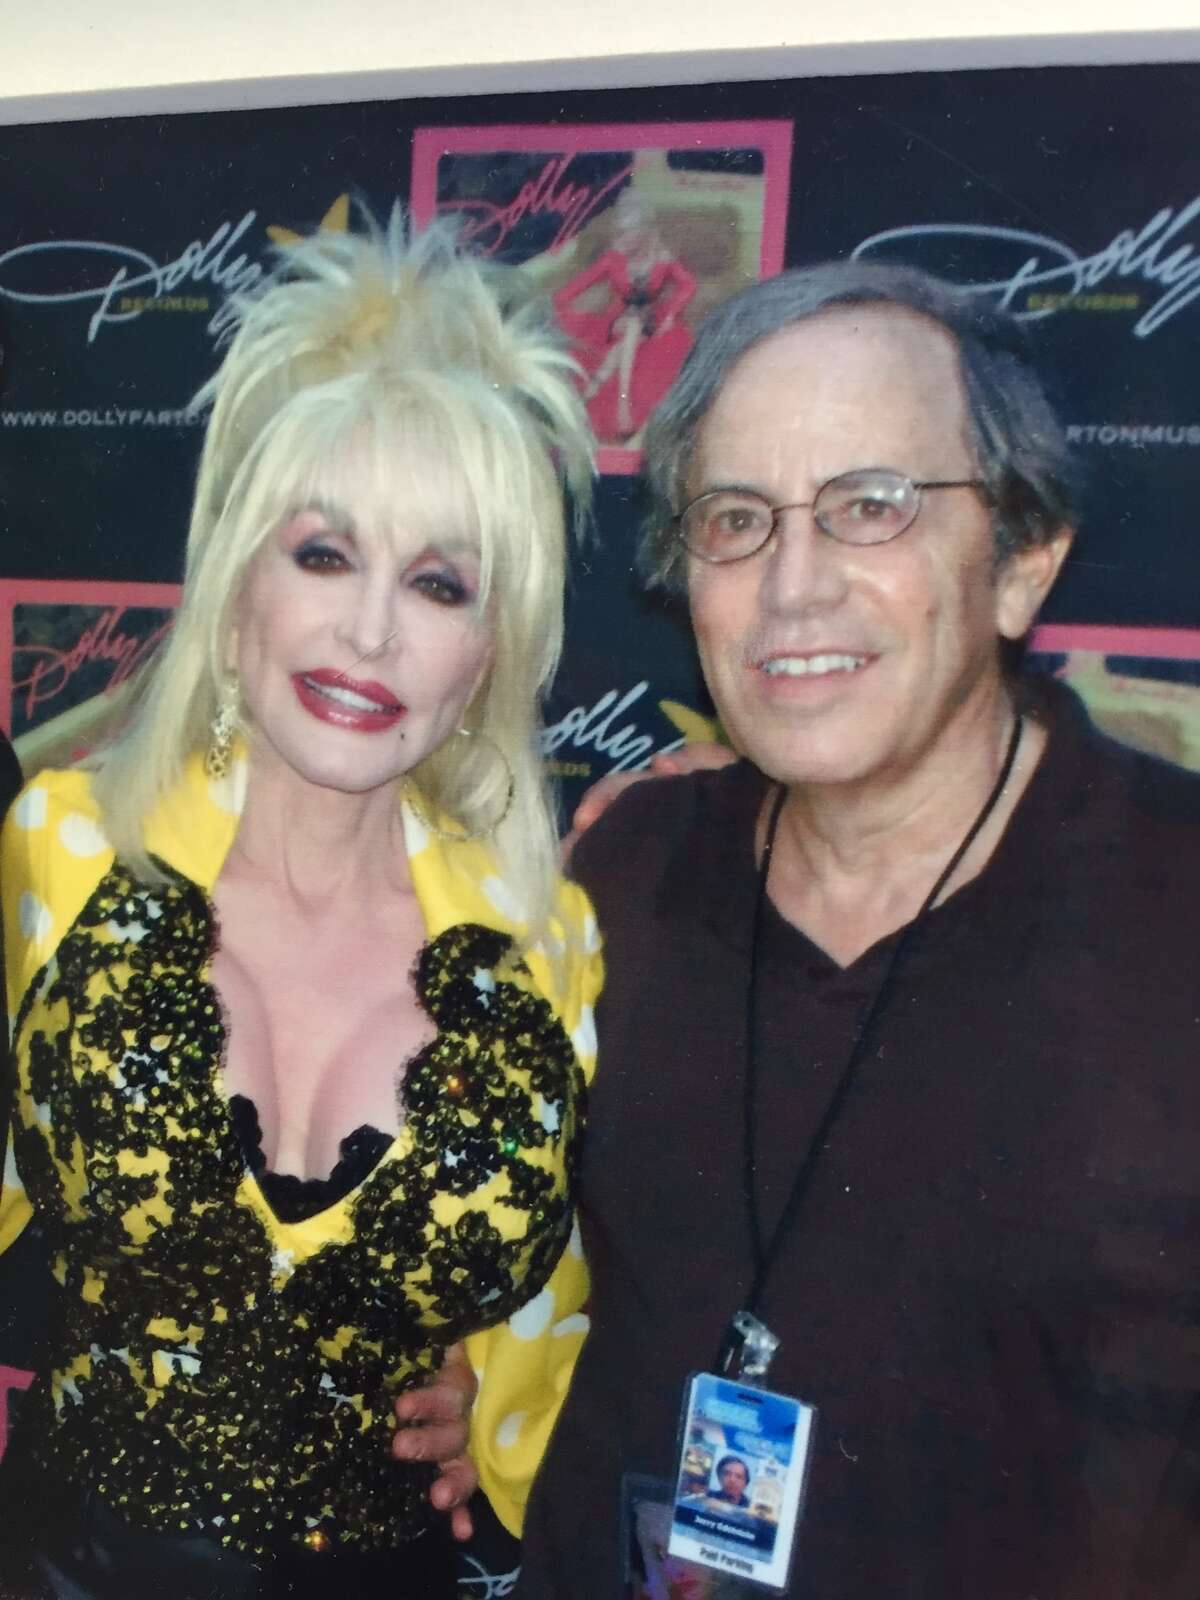 Attorney Jerry Edelstein, who represents clients such as Dolly Parton and Jon Bon Jovi, is in need of a kidney transplant.